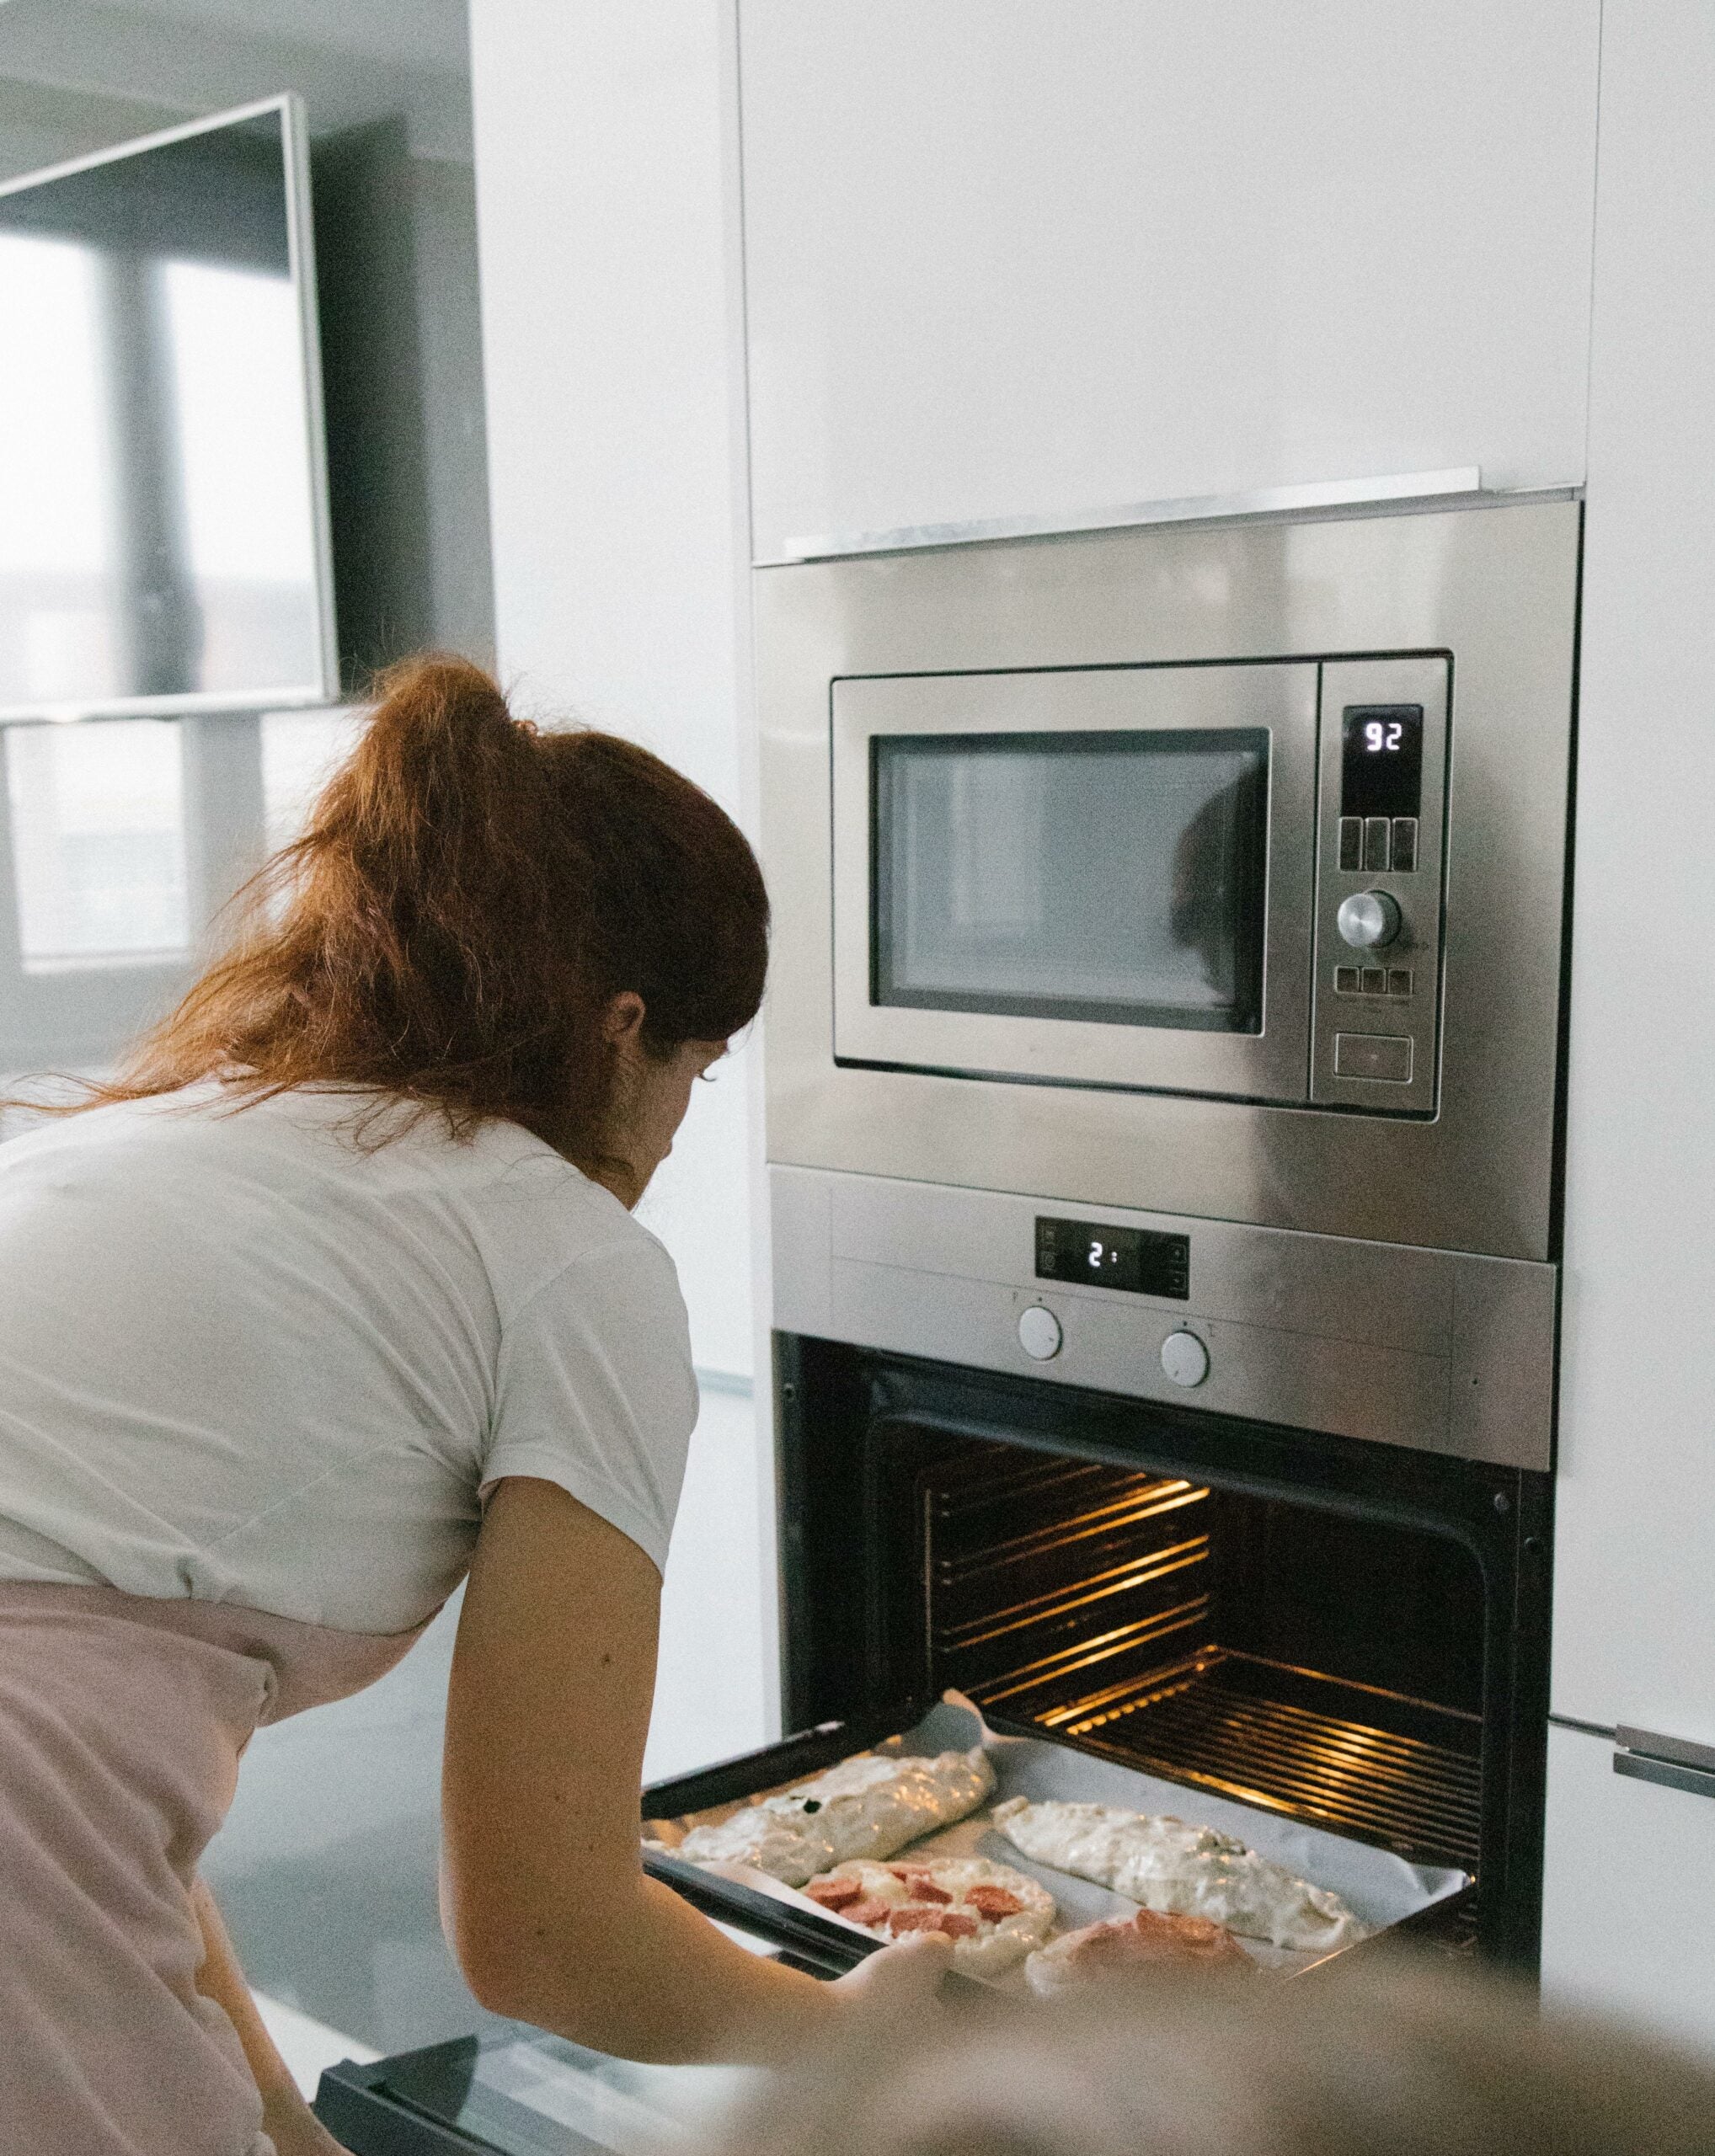 A woman bending down and putting pizza on a pan into an oven